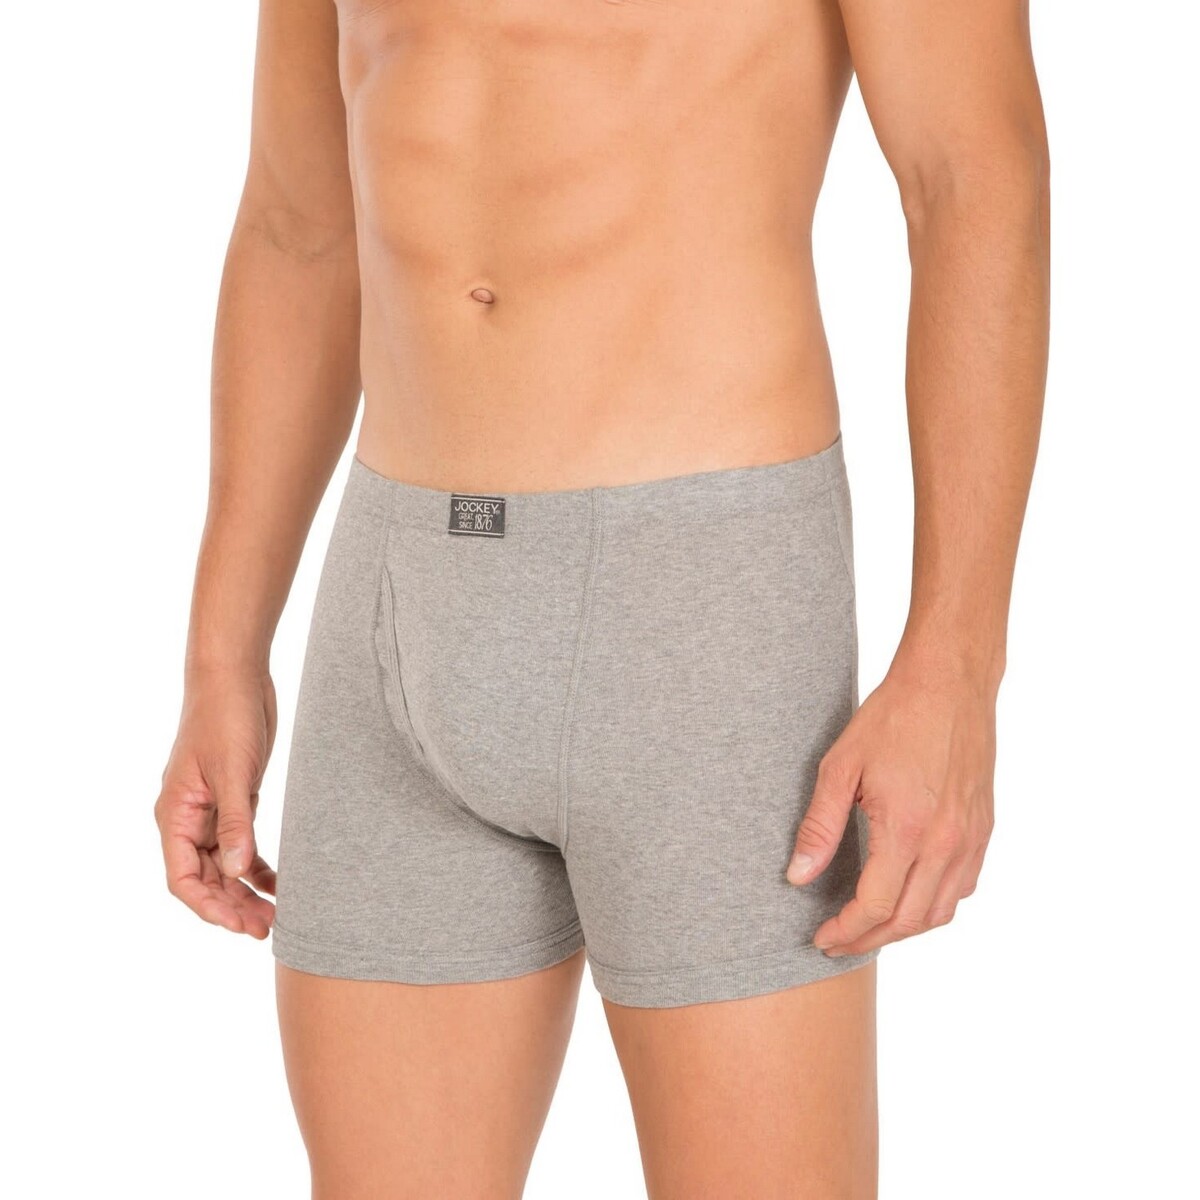 JOCKEY Mens Boxer Brief 8008 2Pc ASSORTED LARGE